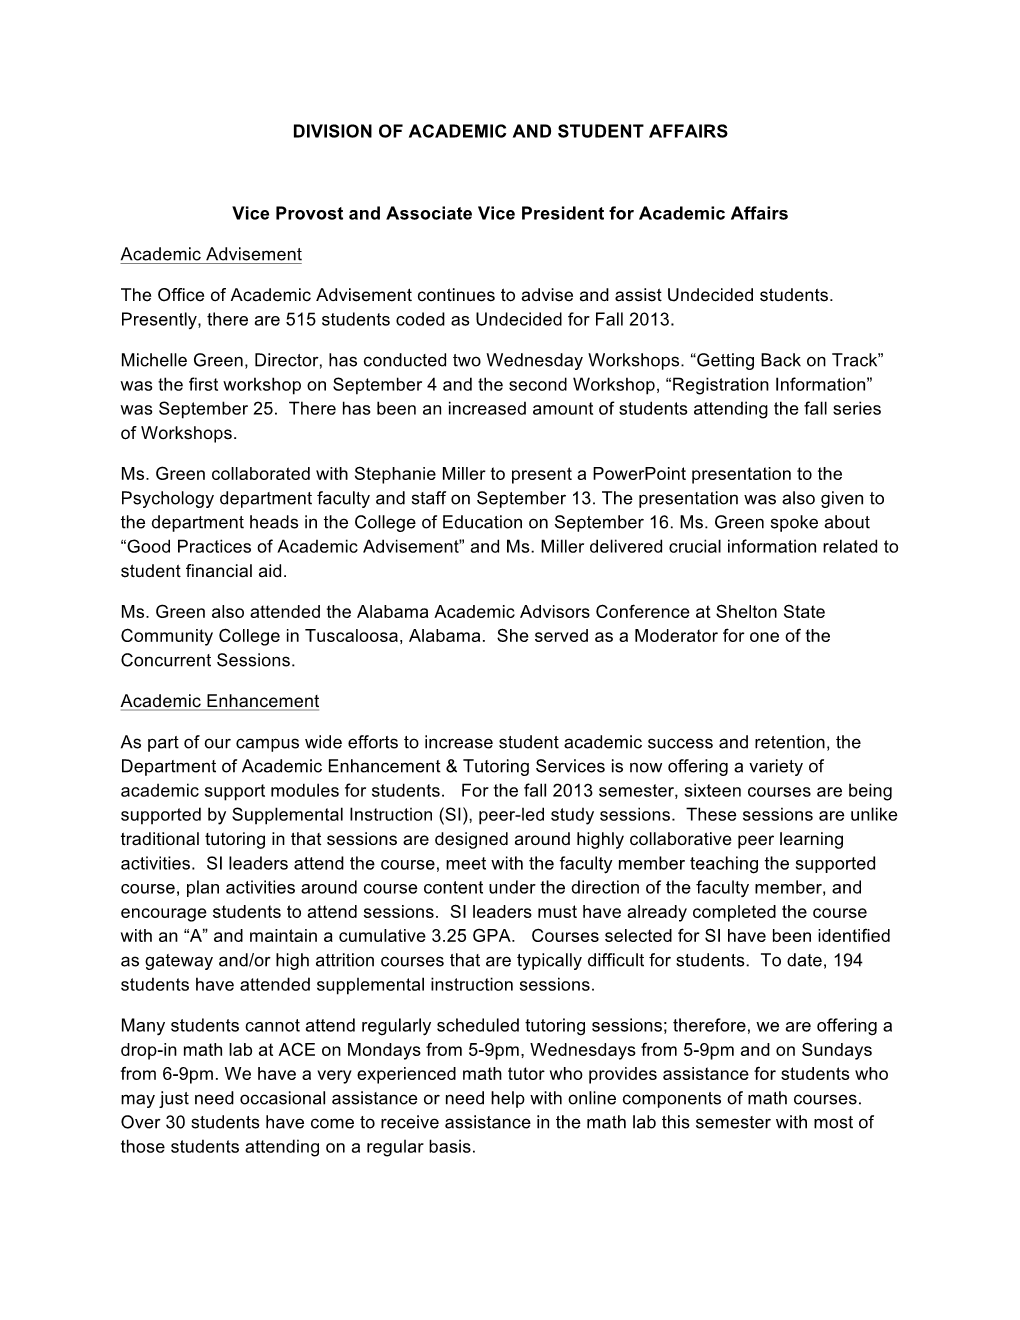 Provost/Vice President for Academic and Student Affairs' Report To